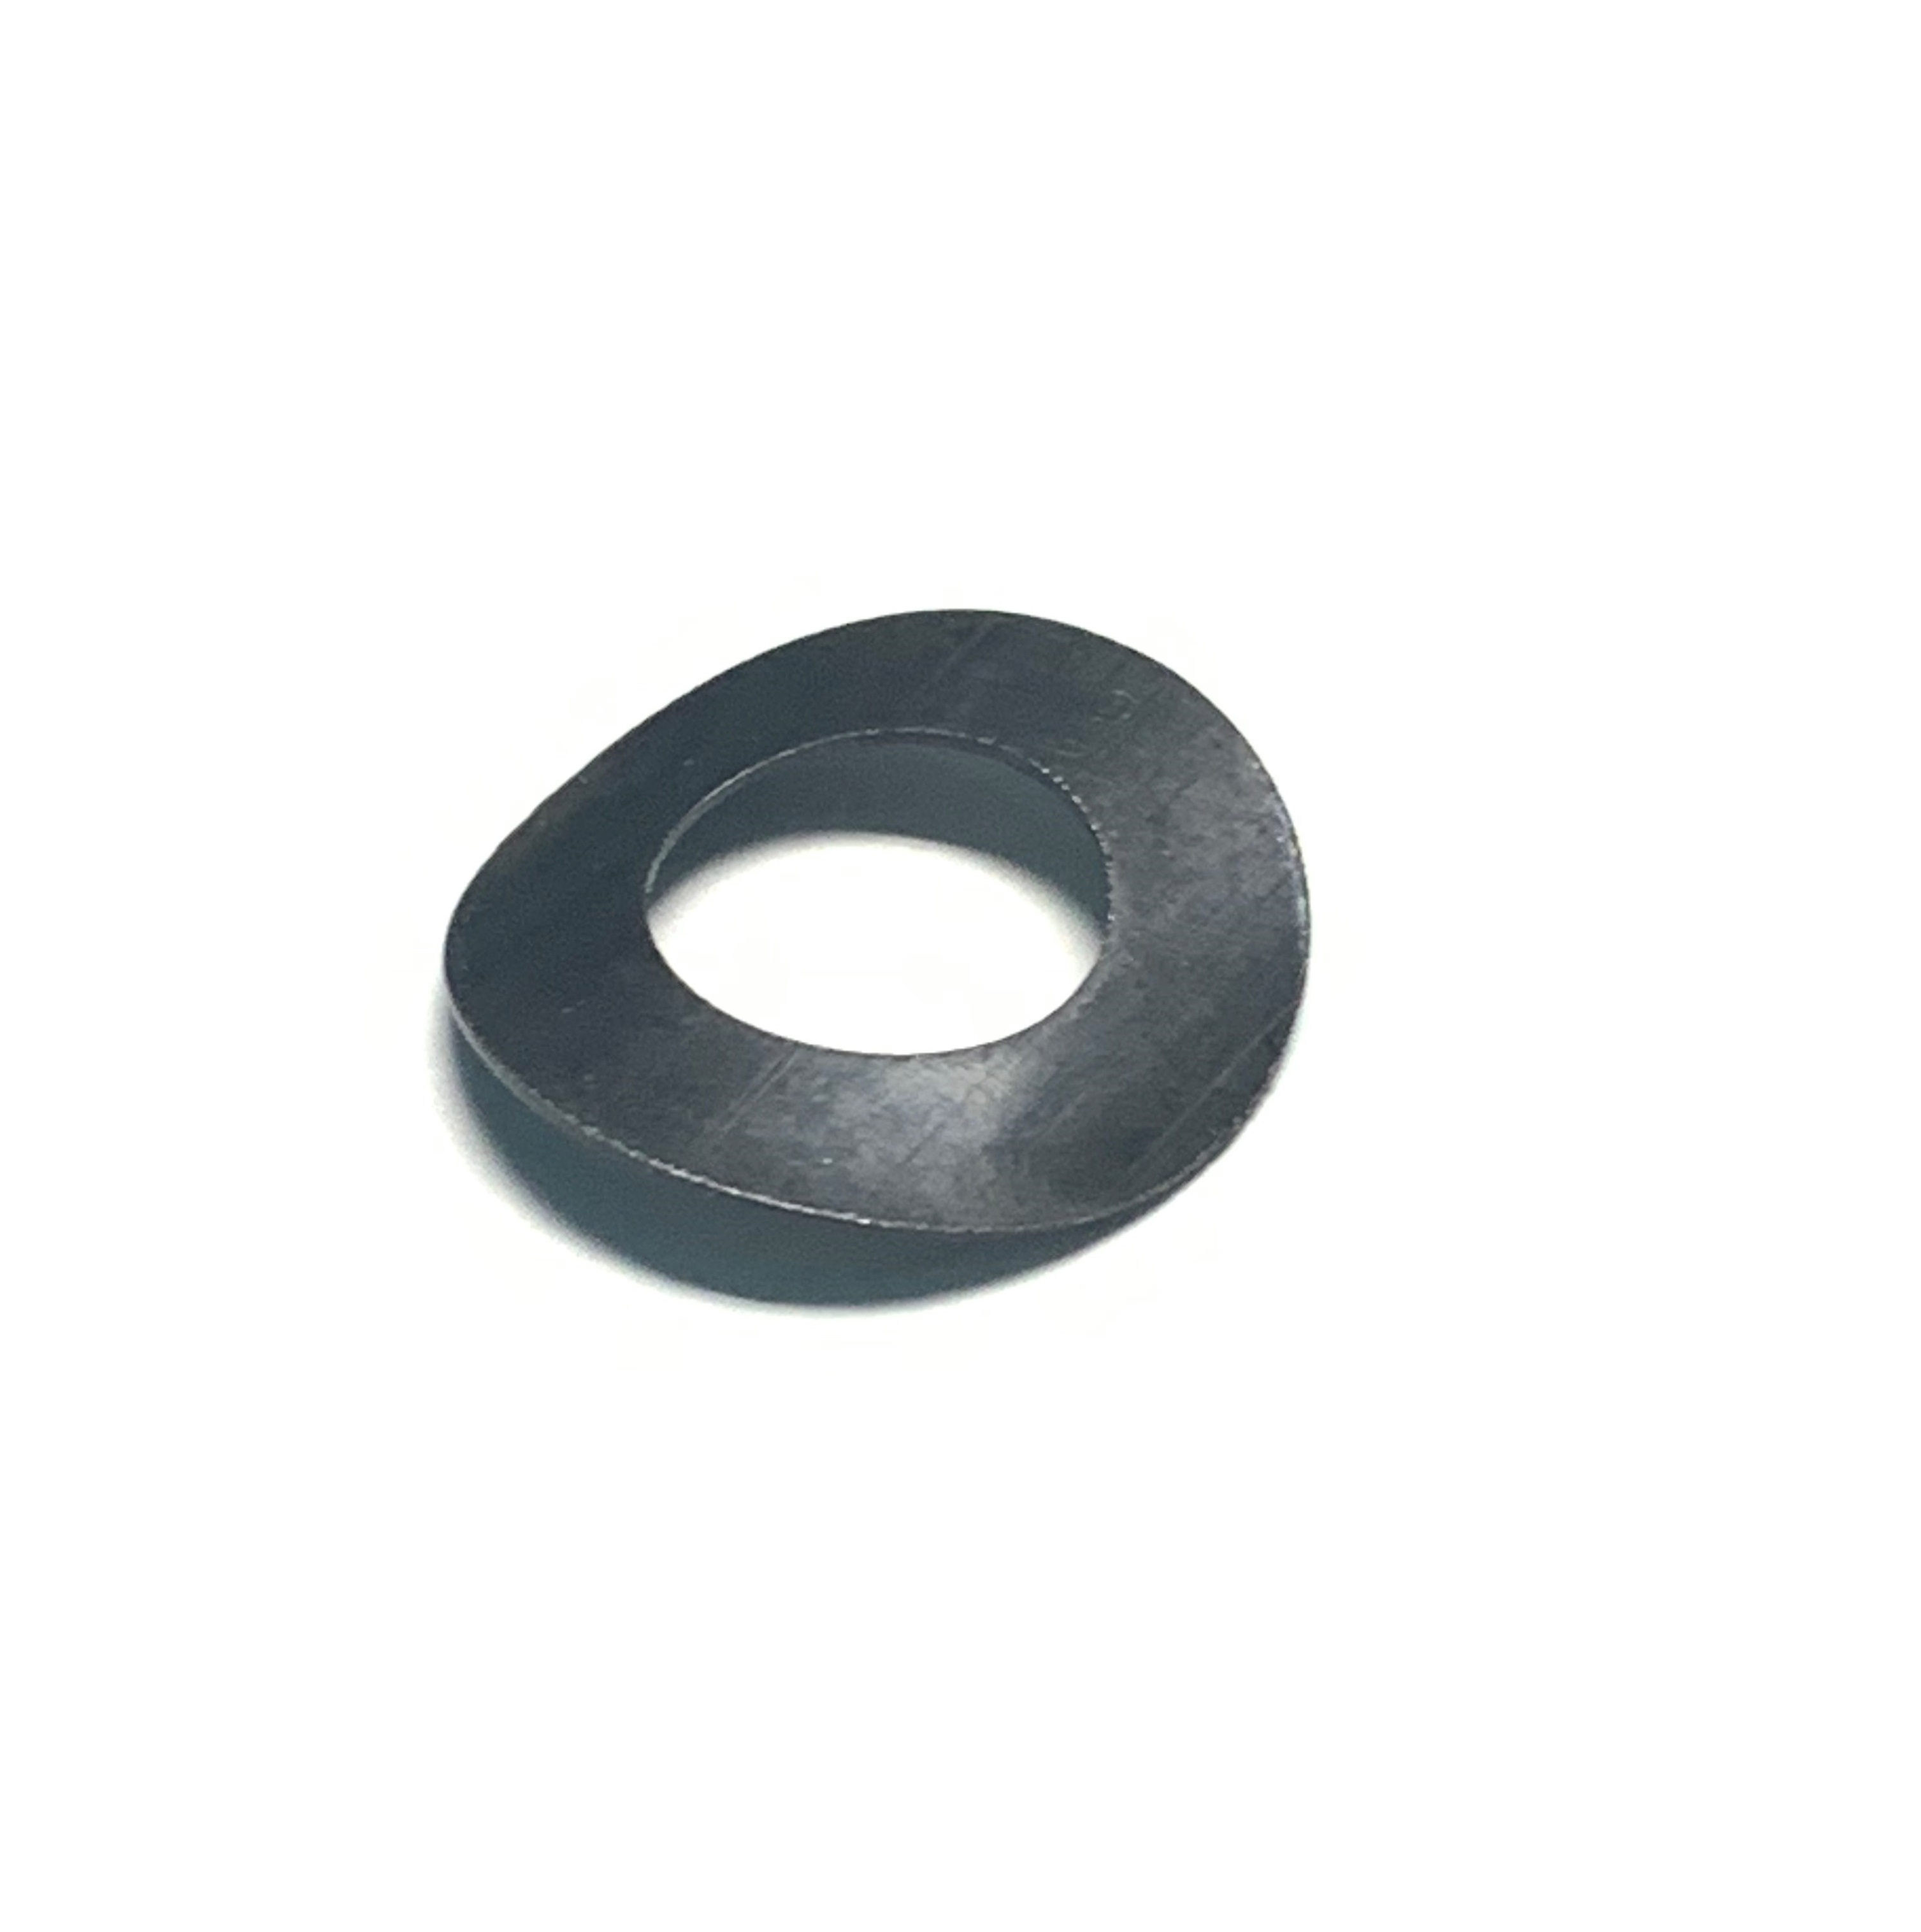 Steel Wavy Washer for Wiper Pivot Shaft - Bag of 10